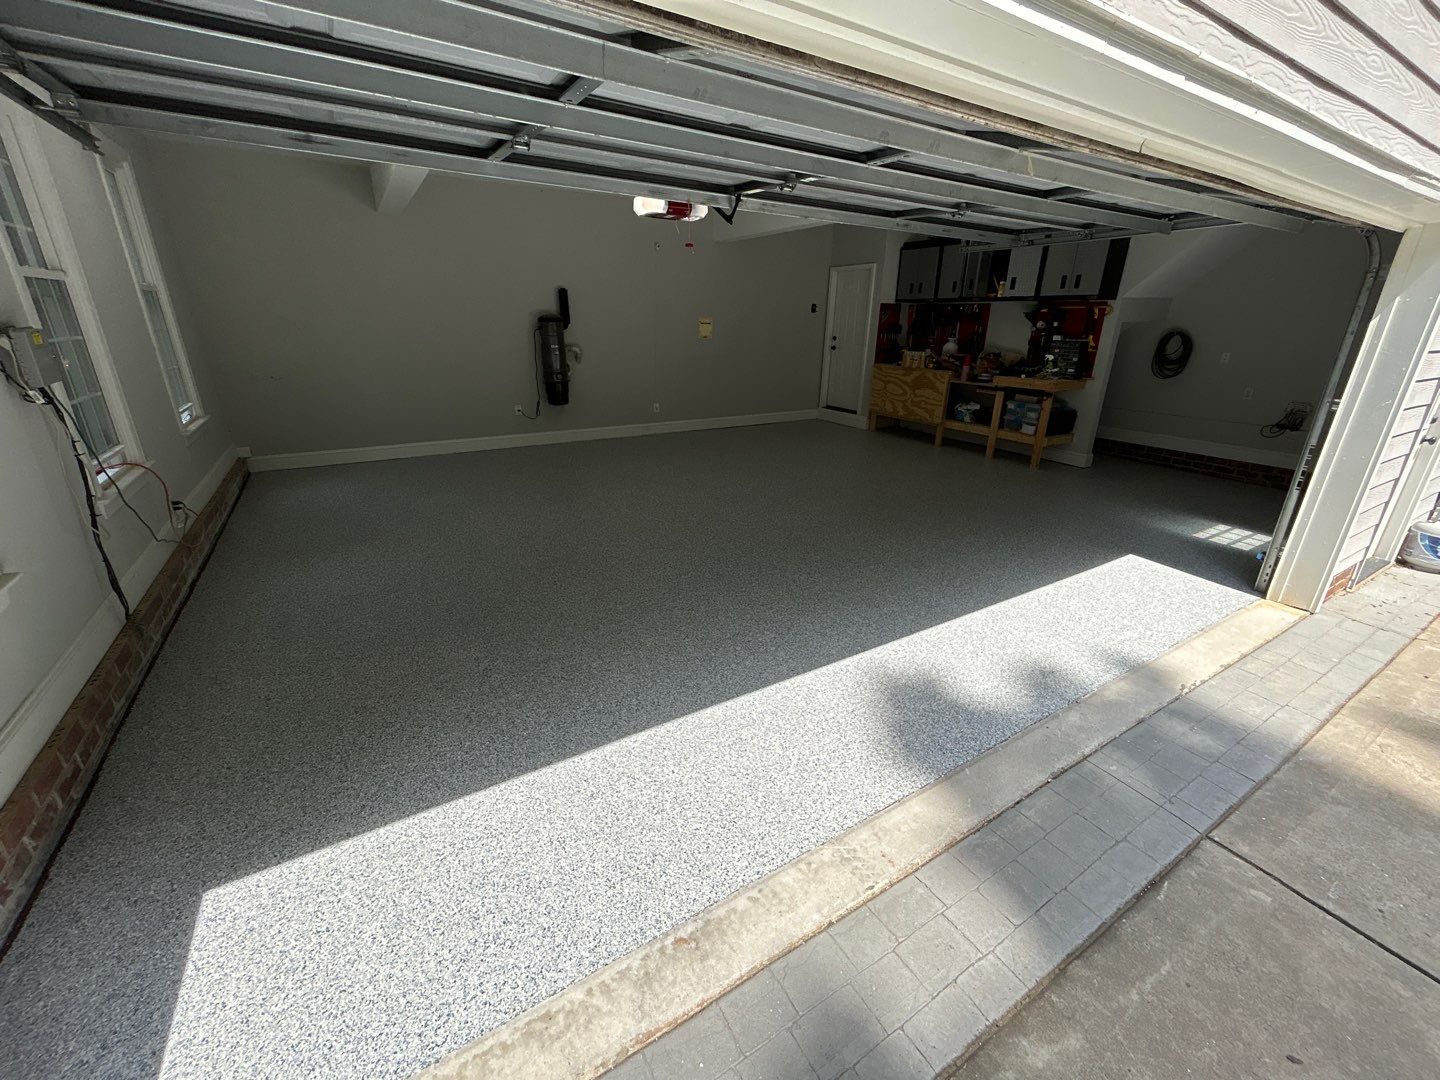 Garage Floor Coating Trends: What's Hot and What's Not with TAGG Concrete Coatings